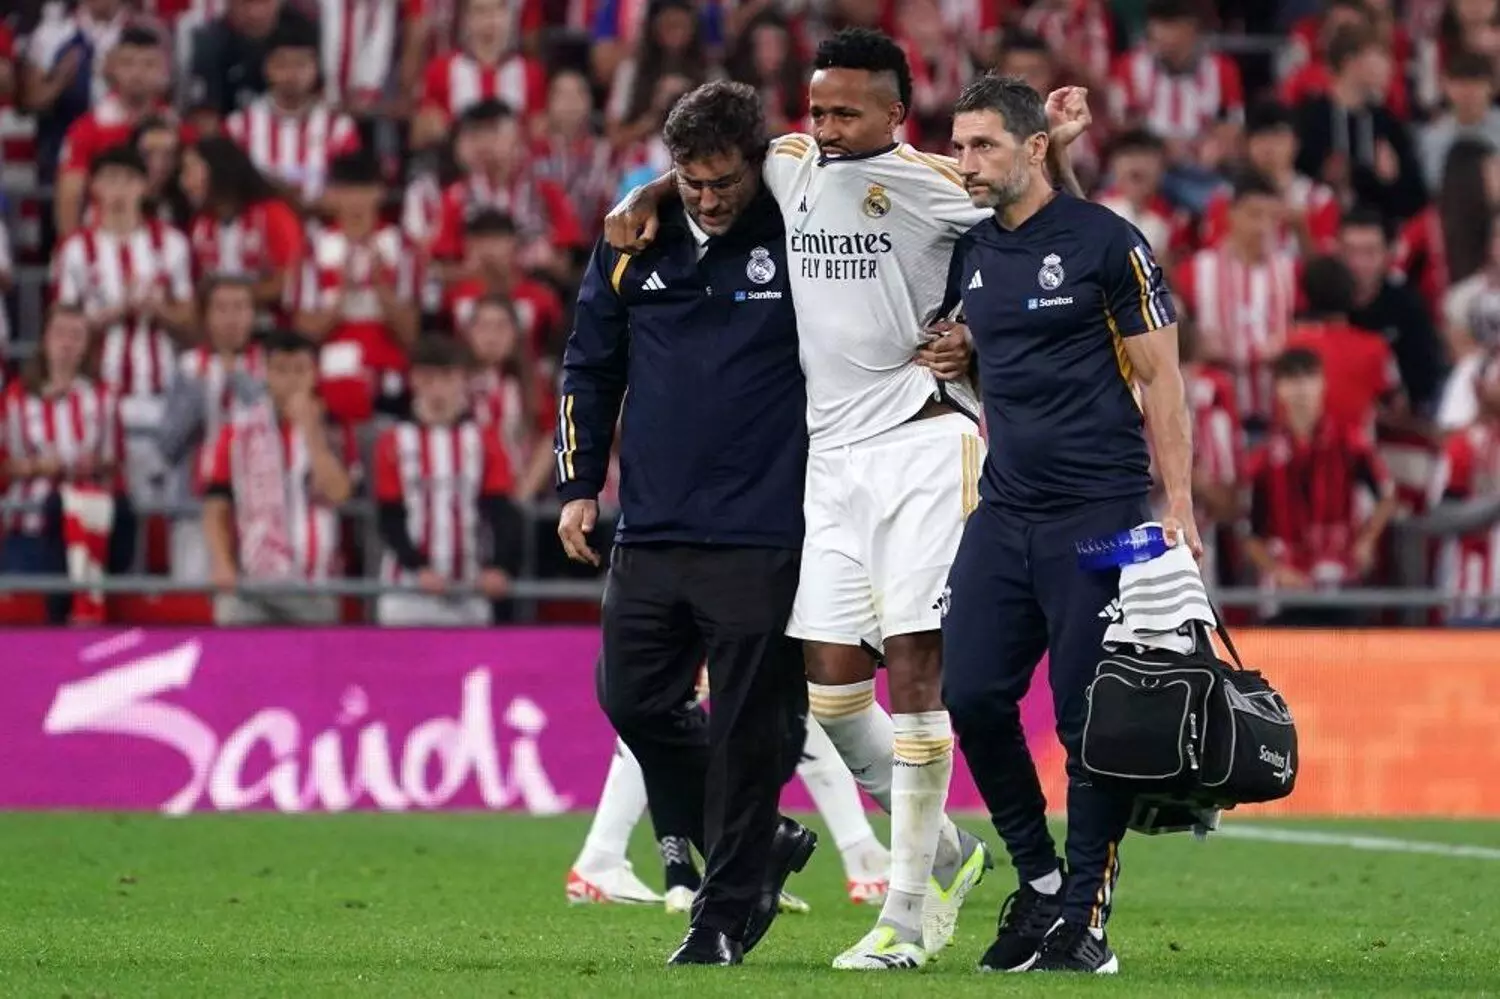 Real Madrid’s Militao to undergo knee surgery after ligament tear